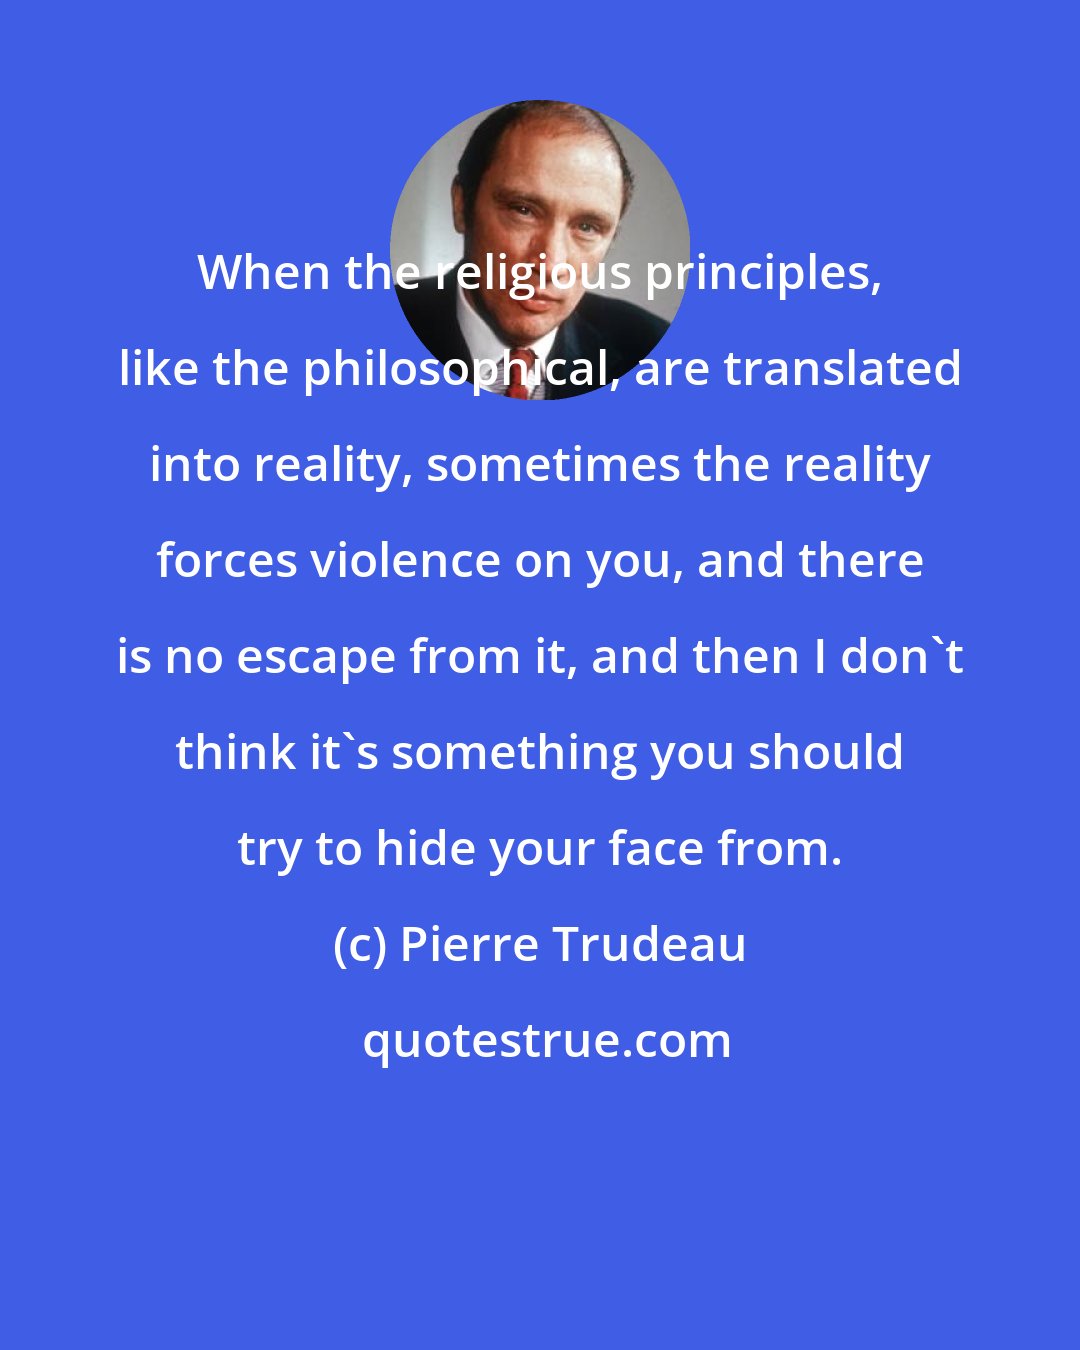 Pierre Trudeau: When the religious principles, like the philosophical, are translated into reality, sometimes the reality forces violence on you, and there is no escape from it, and then I don't think it's something you should try to hide your face from.